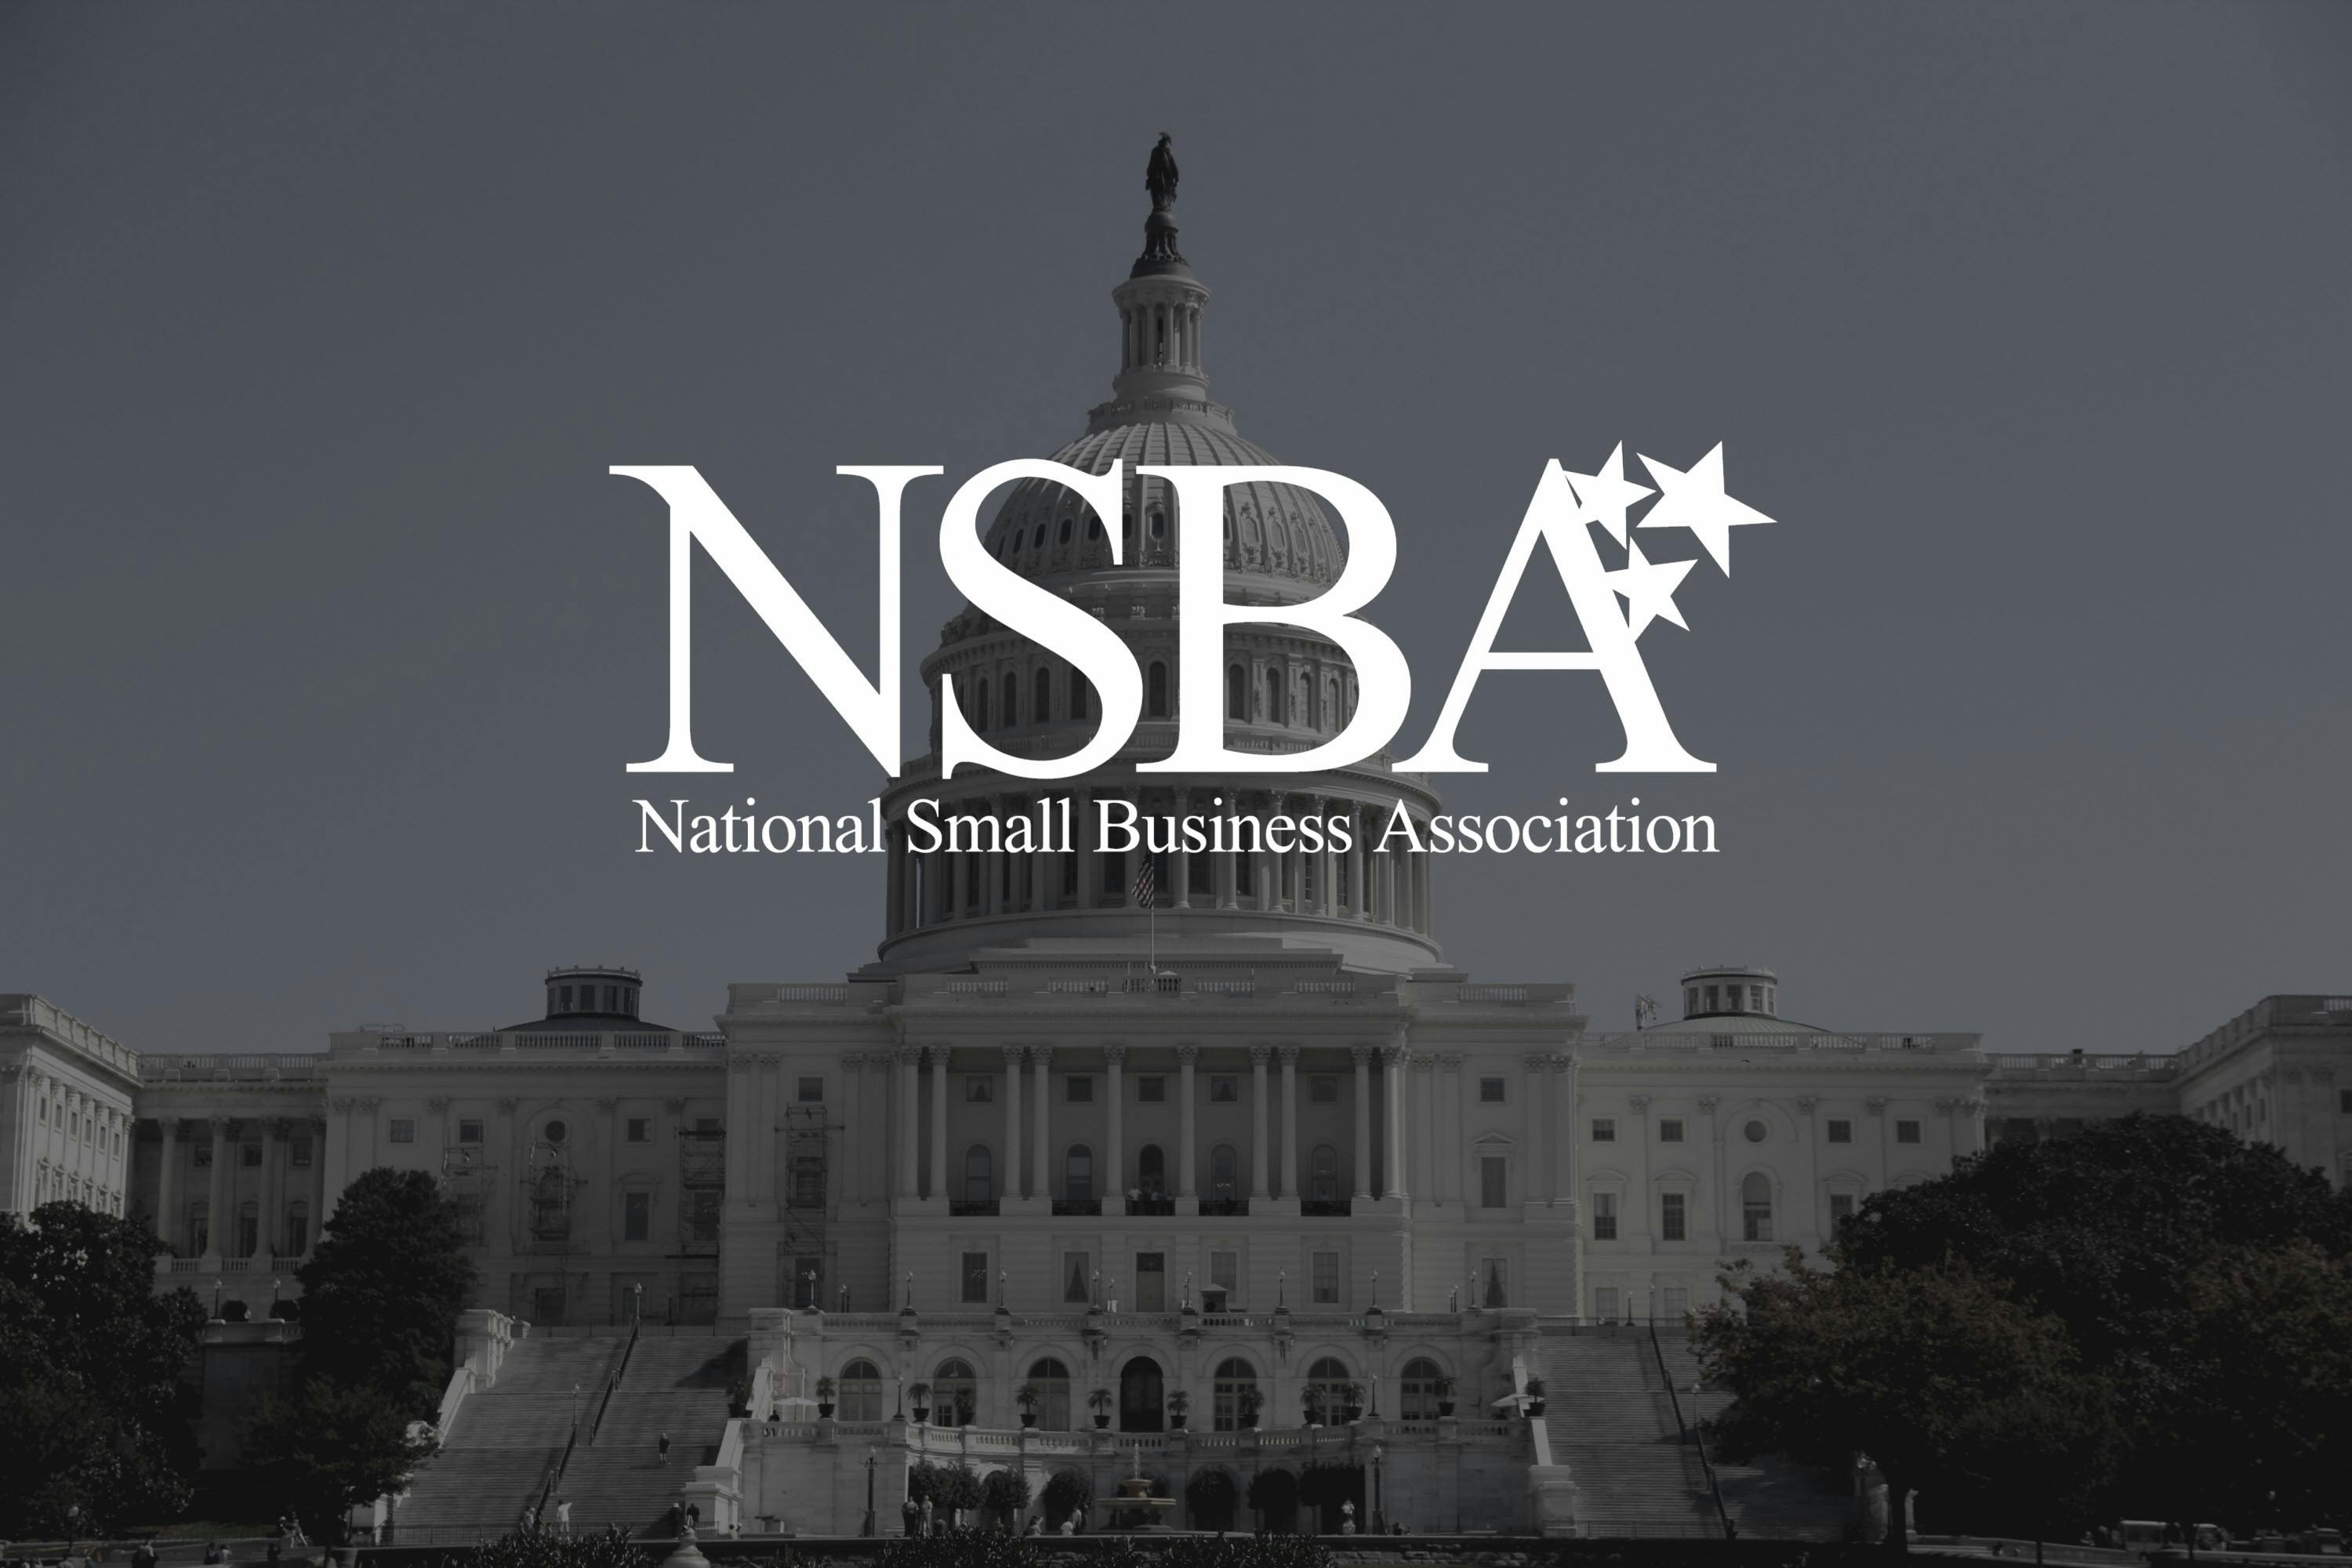 The National Small Business Association logo overtop of the US Capitol.